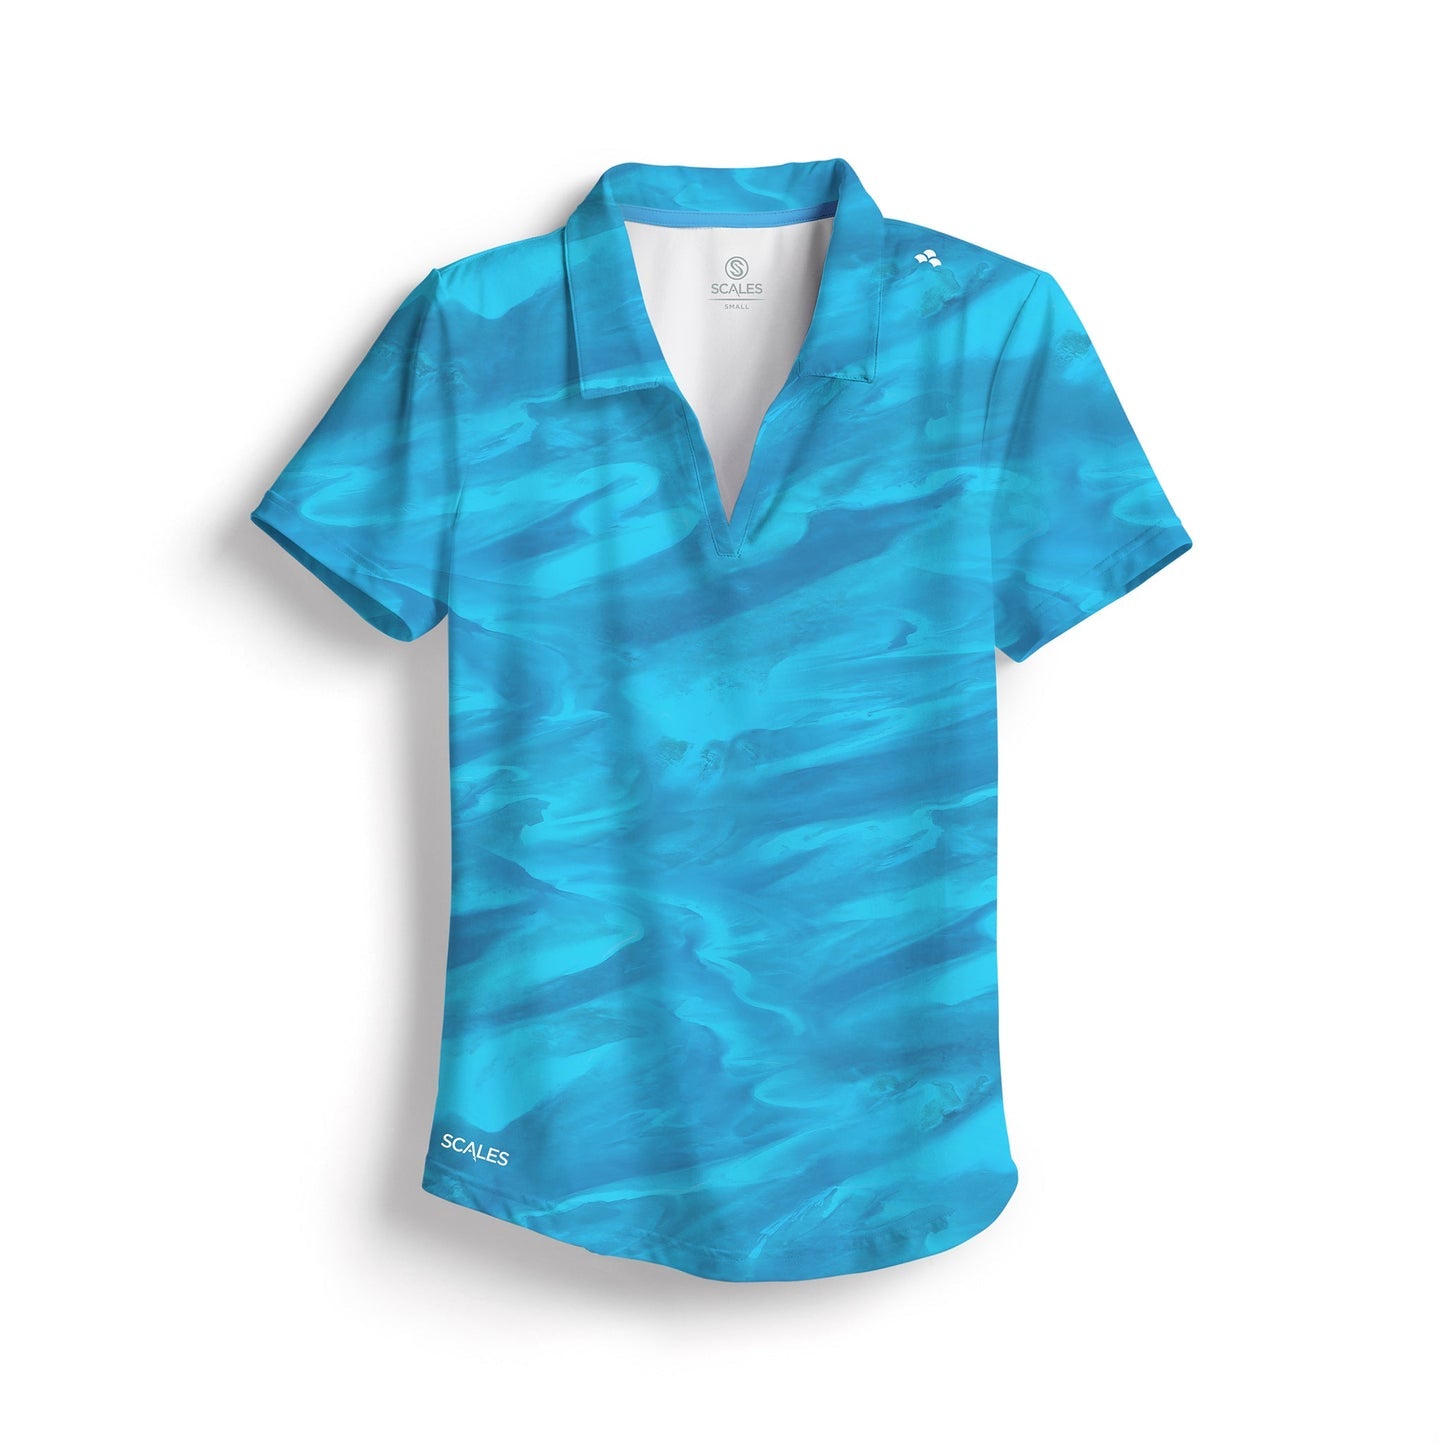 SCALES Bahamas Current Womens Polo